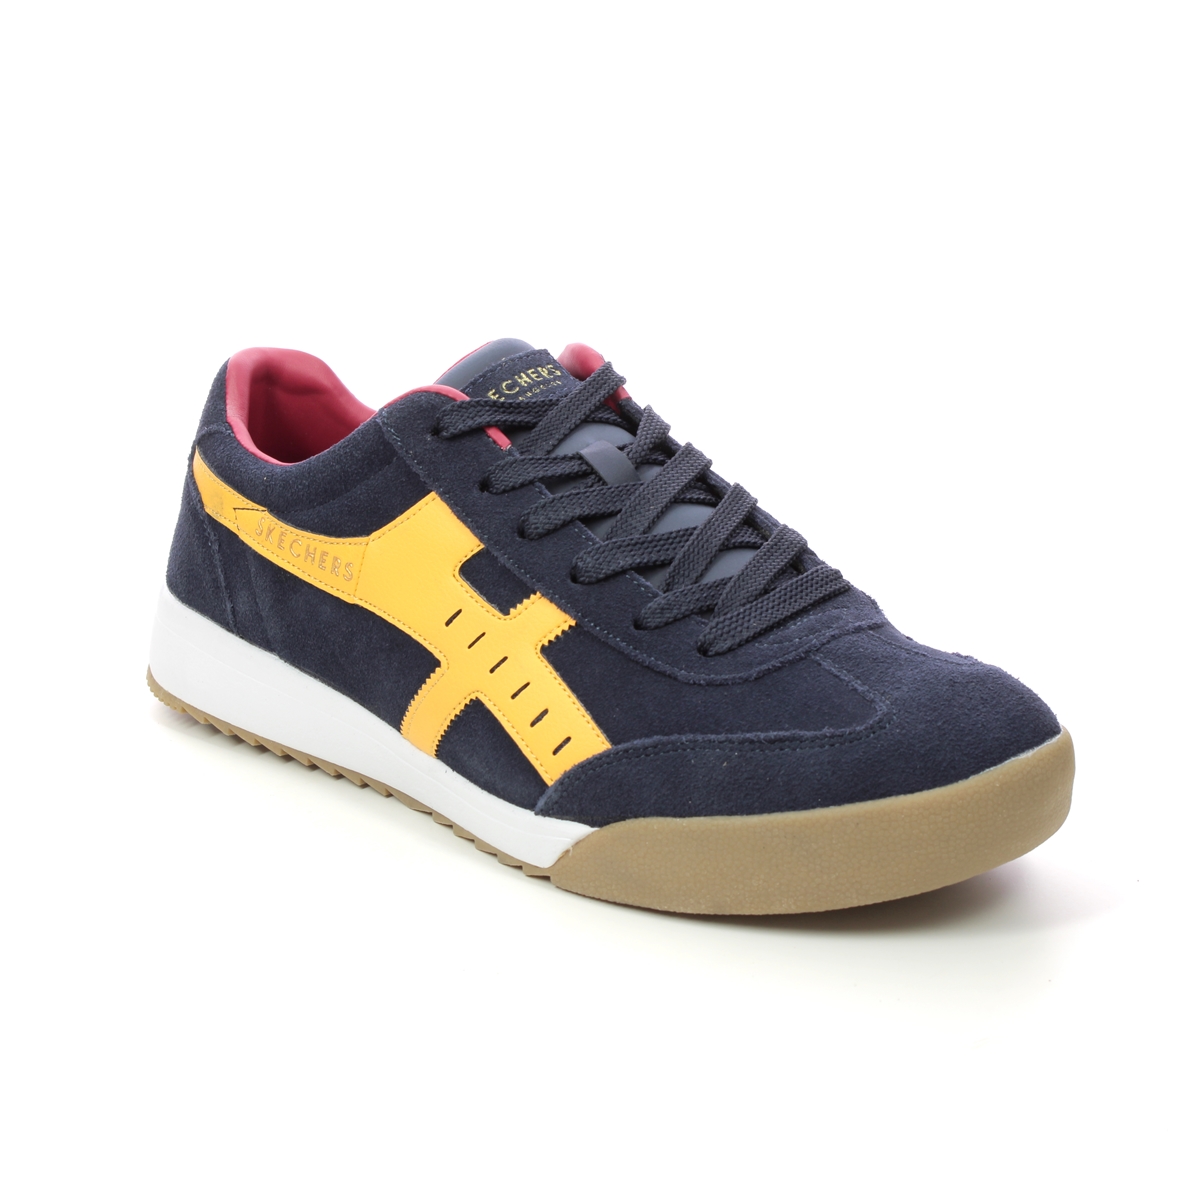 Skechers Zinger Manchego NVYL Navy Yellow Mens trainers 237351 in a Plain Leather and Textile in Size 7